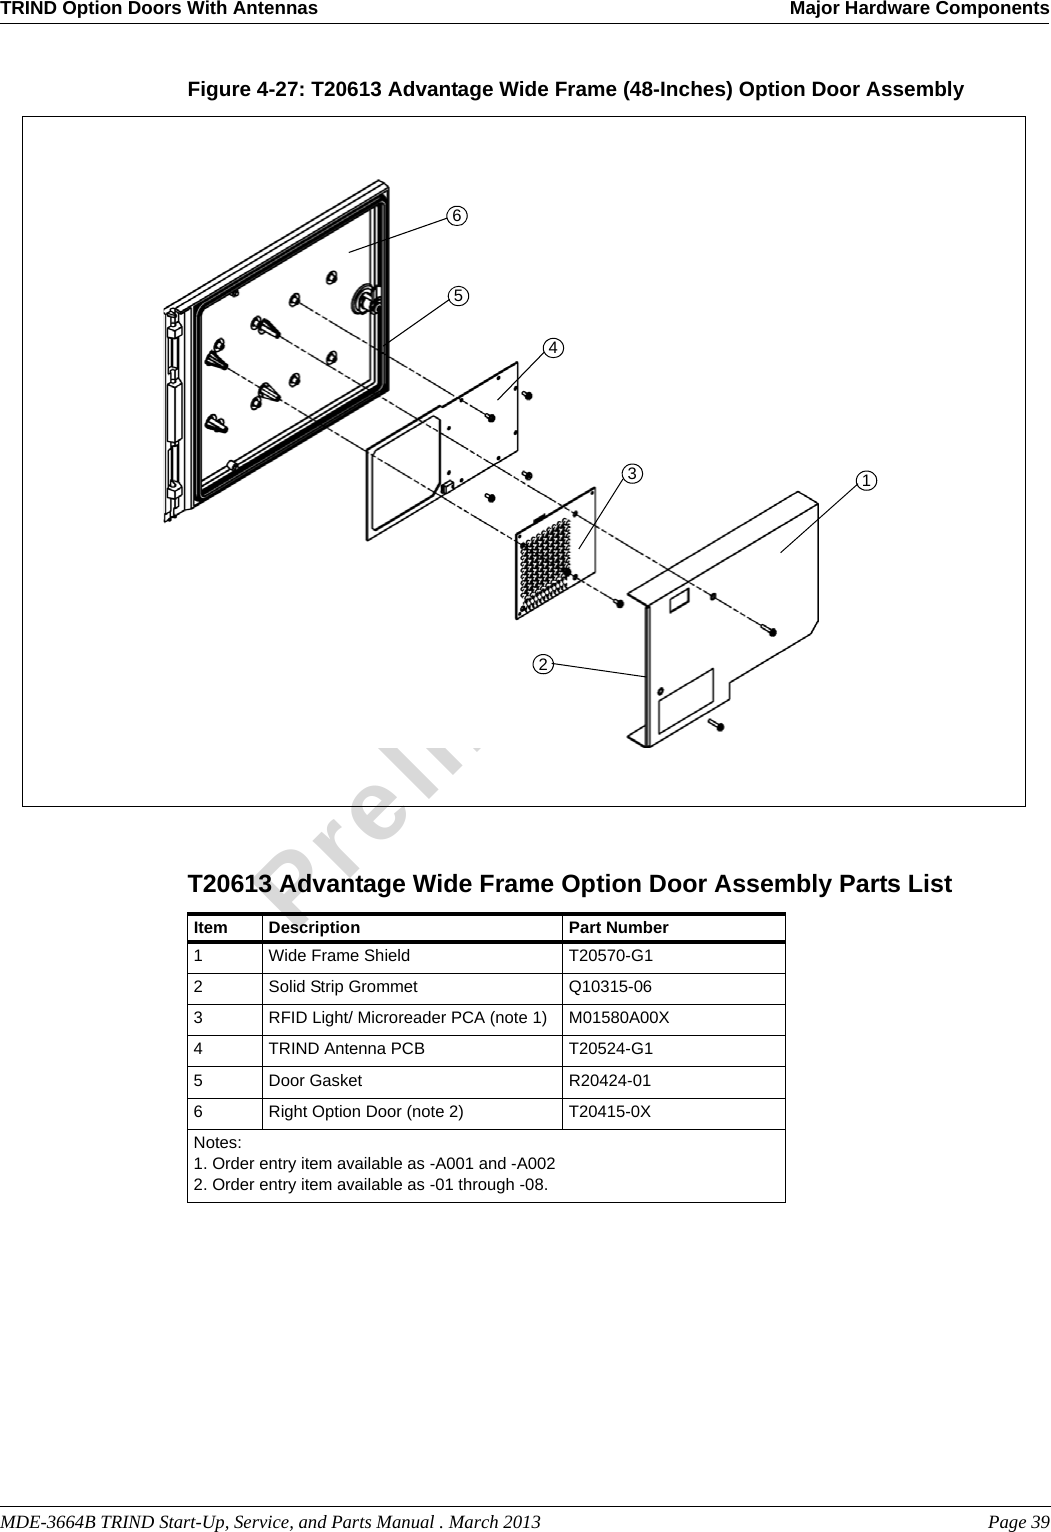 MDE-3664B TRIND Start-Up, Service, and Parts Manual . March 2013 Page 39TRIND Option Doors With Antennas Major Hardware ComponentsPreliminaryFigure 4-27: T20613 Advantage Wide Frame (48-Inches) Option Door Assembly654312 T20613 Advantage Wide Frame Option Door Assembly Parts ListItem Description Part Number1Wide Frame Shield T20570-G12Solid Strip Grommet Q10315-063RFID Light/ Microreader PCA (note 1) M01580A00X4TRIND Antenna PCB T20524-G15Door Gasket R20424-016Right Option Door (note 2) T20415-0XNotes:1. Order entry item available as -A001 and -A0022. Order entry item available as -01 through -08.